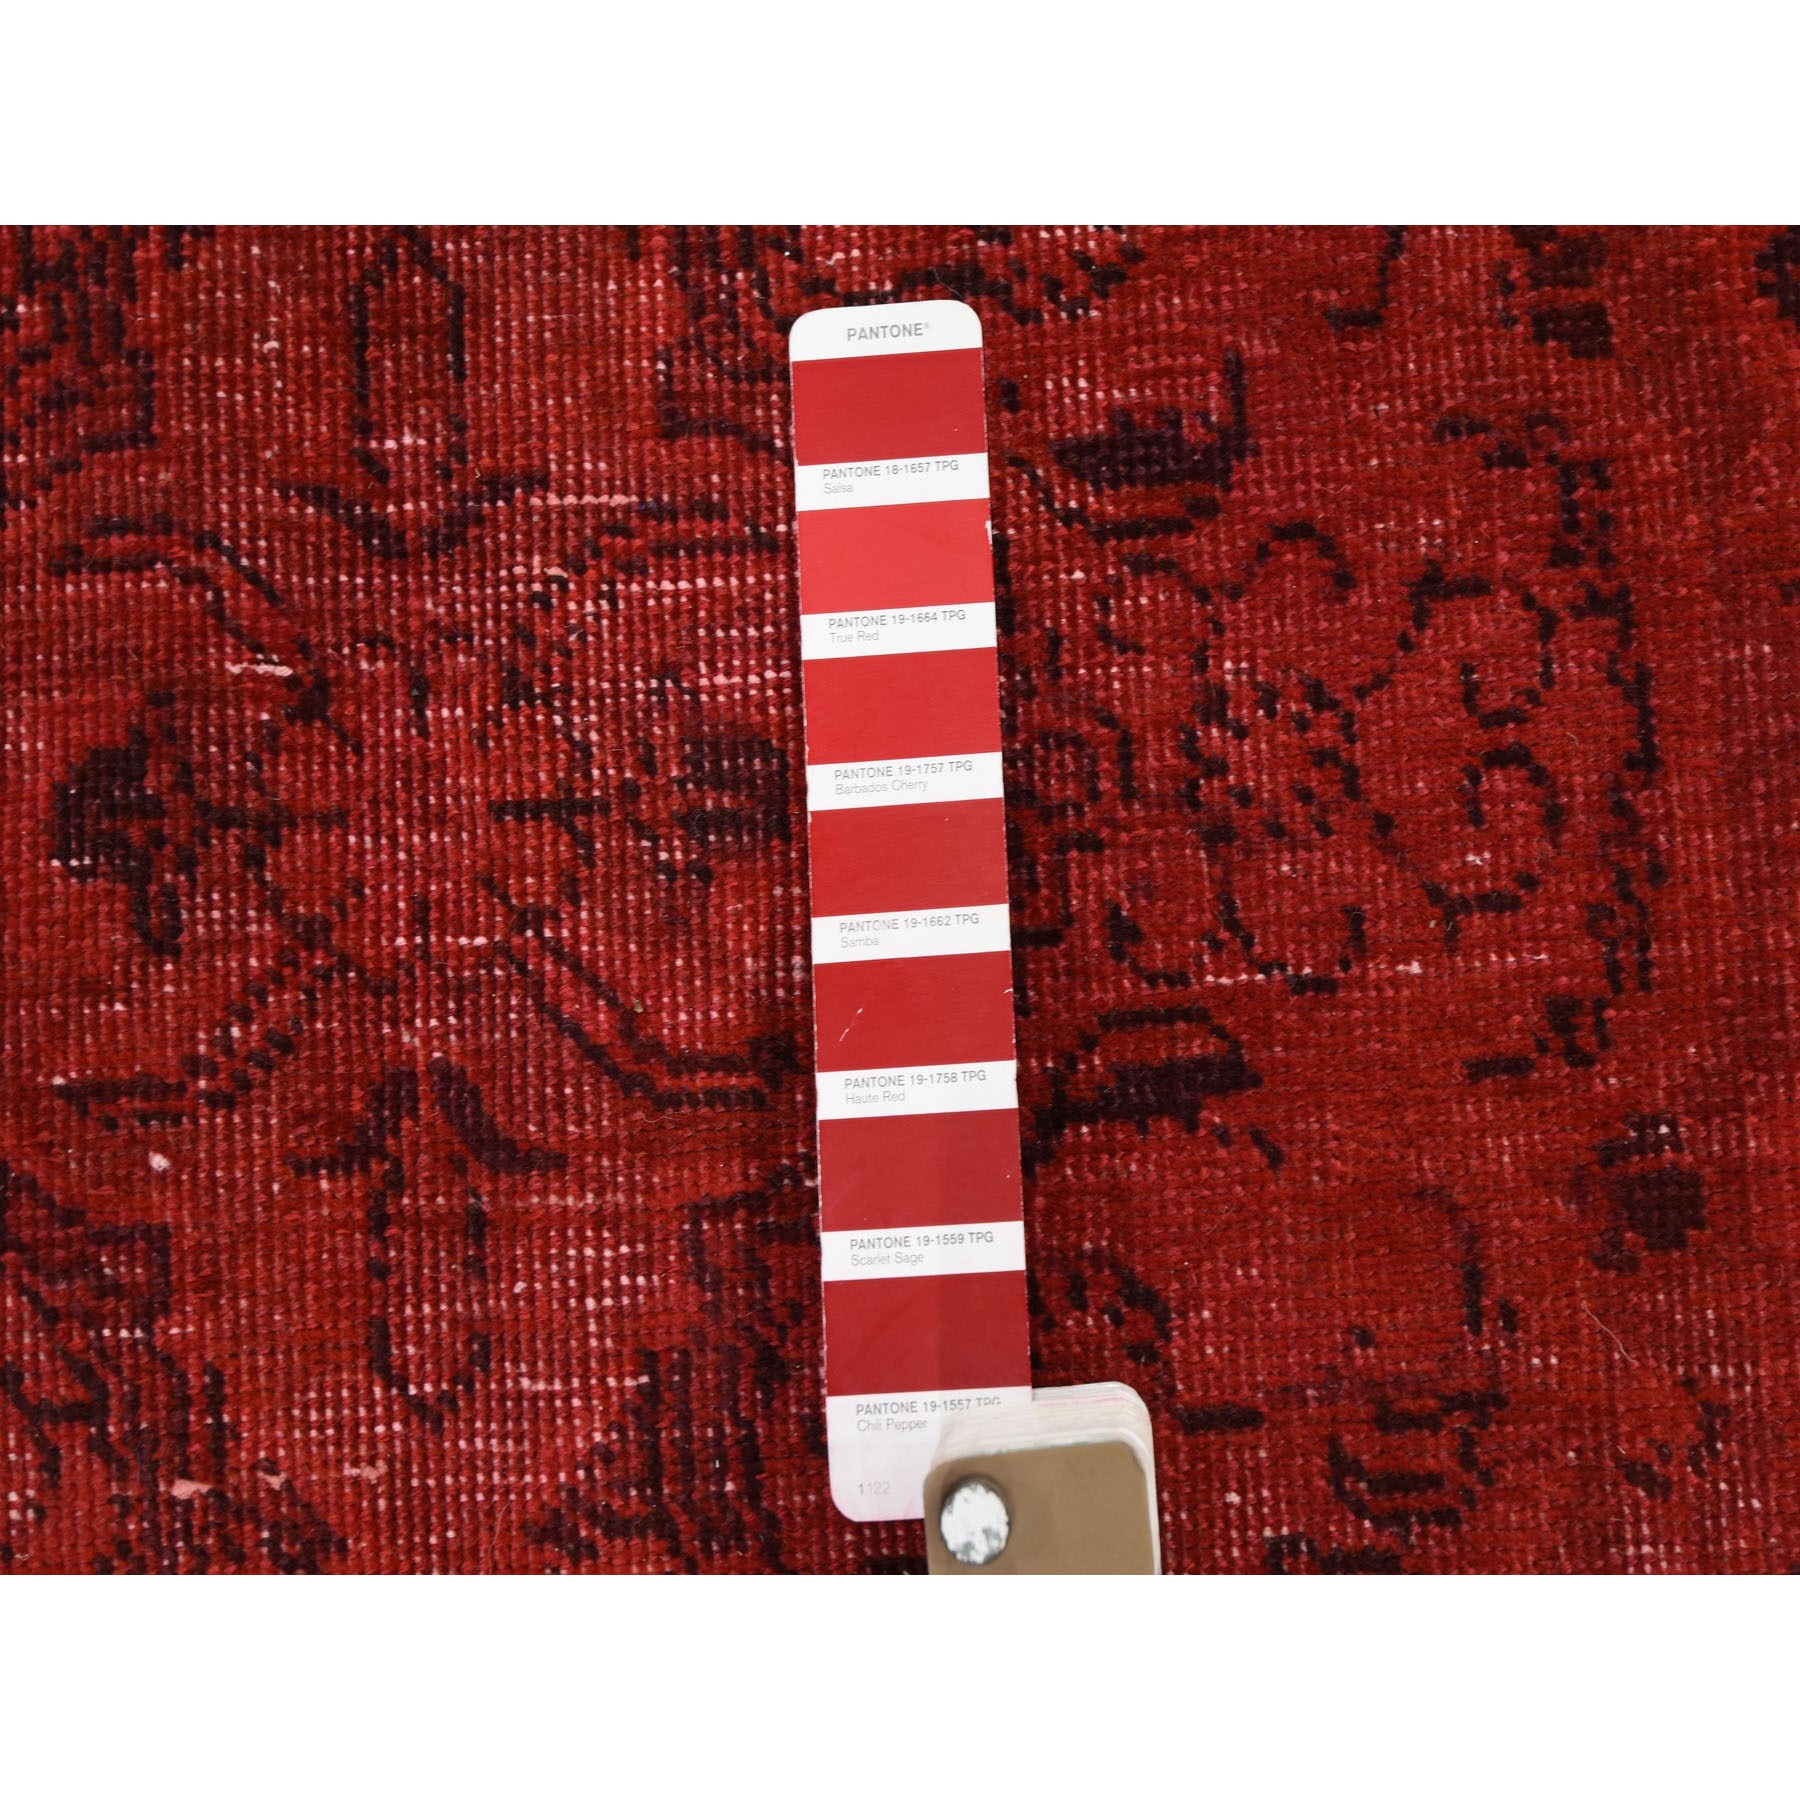 7-x9-8  Hand Knotted Overdyed Red Persian Tabriz Barjasta Vintage Rug 